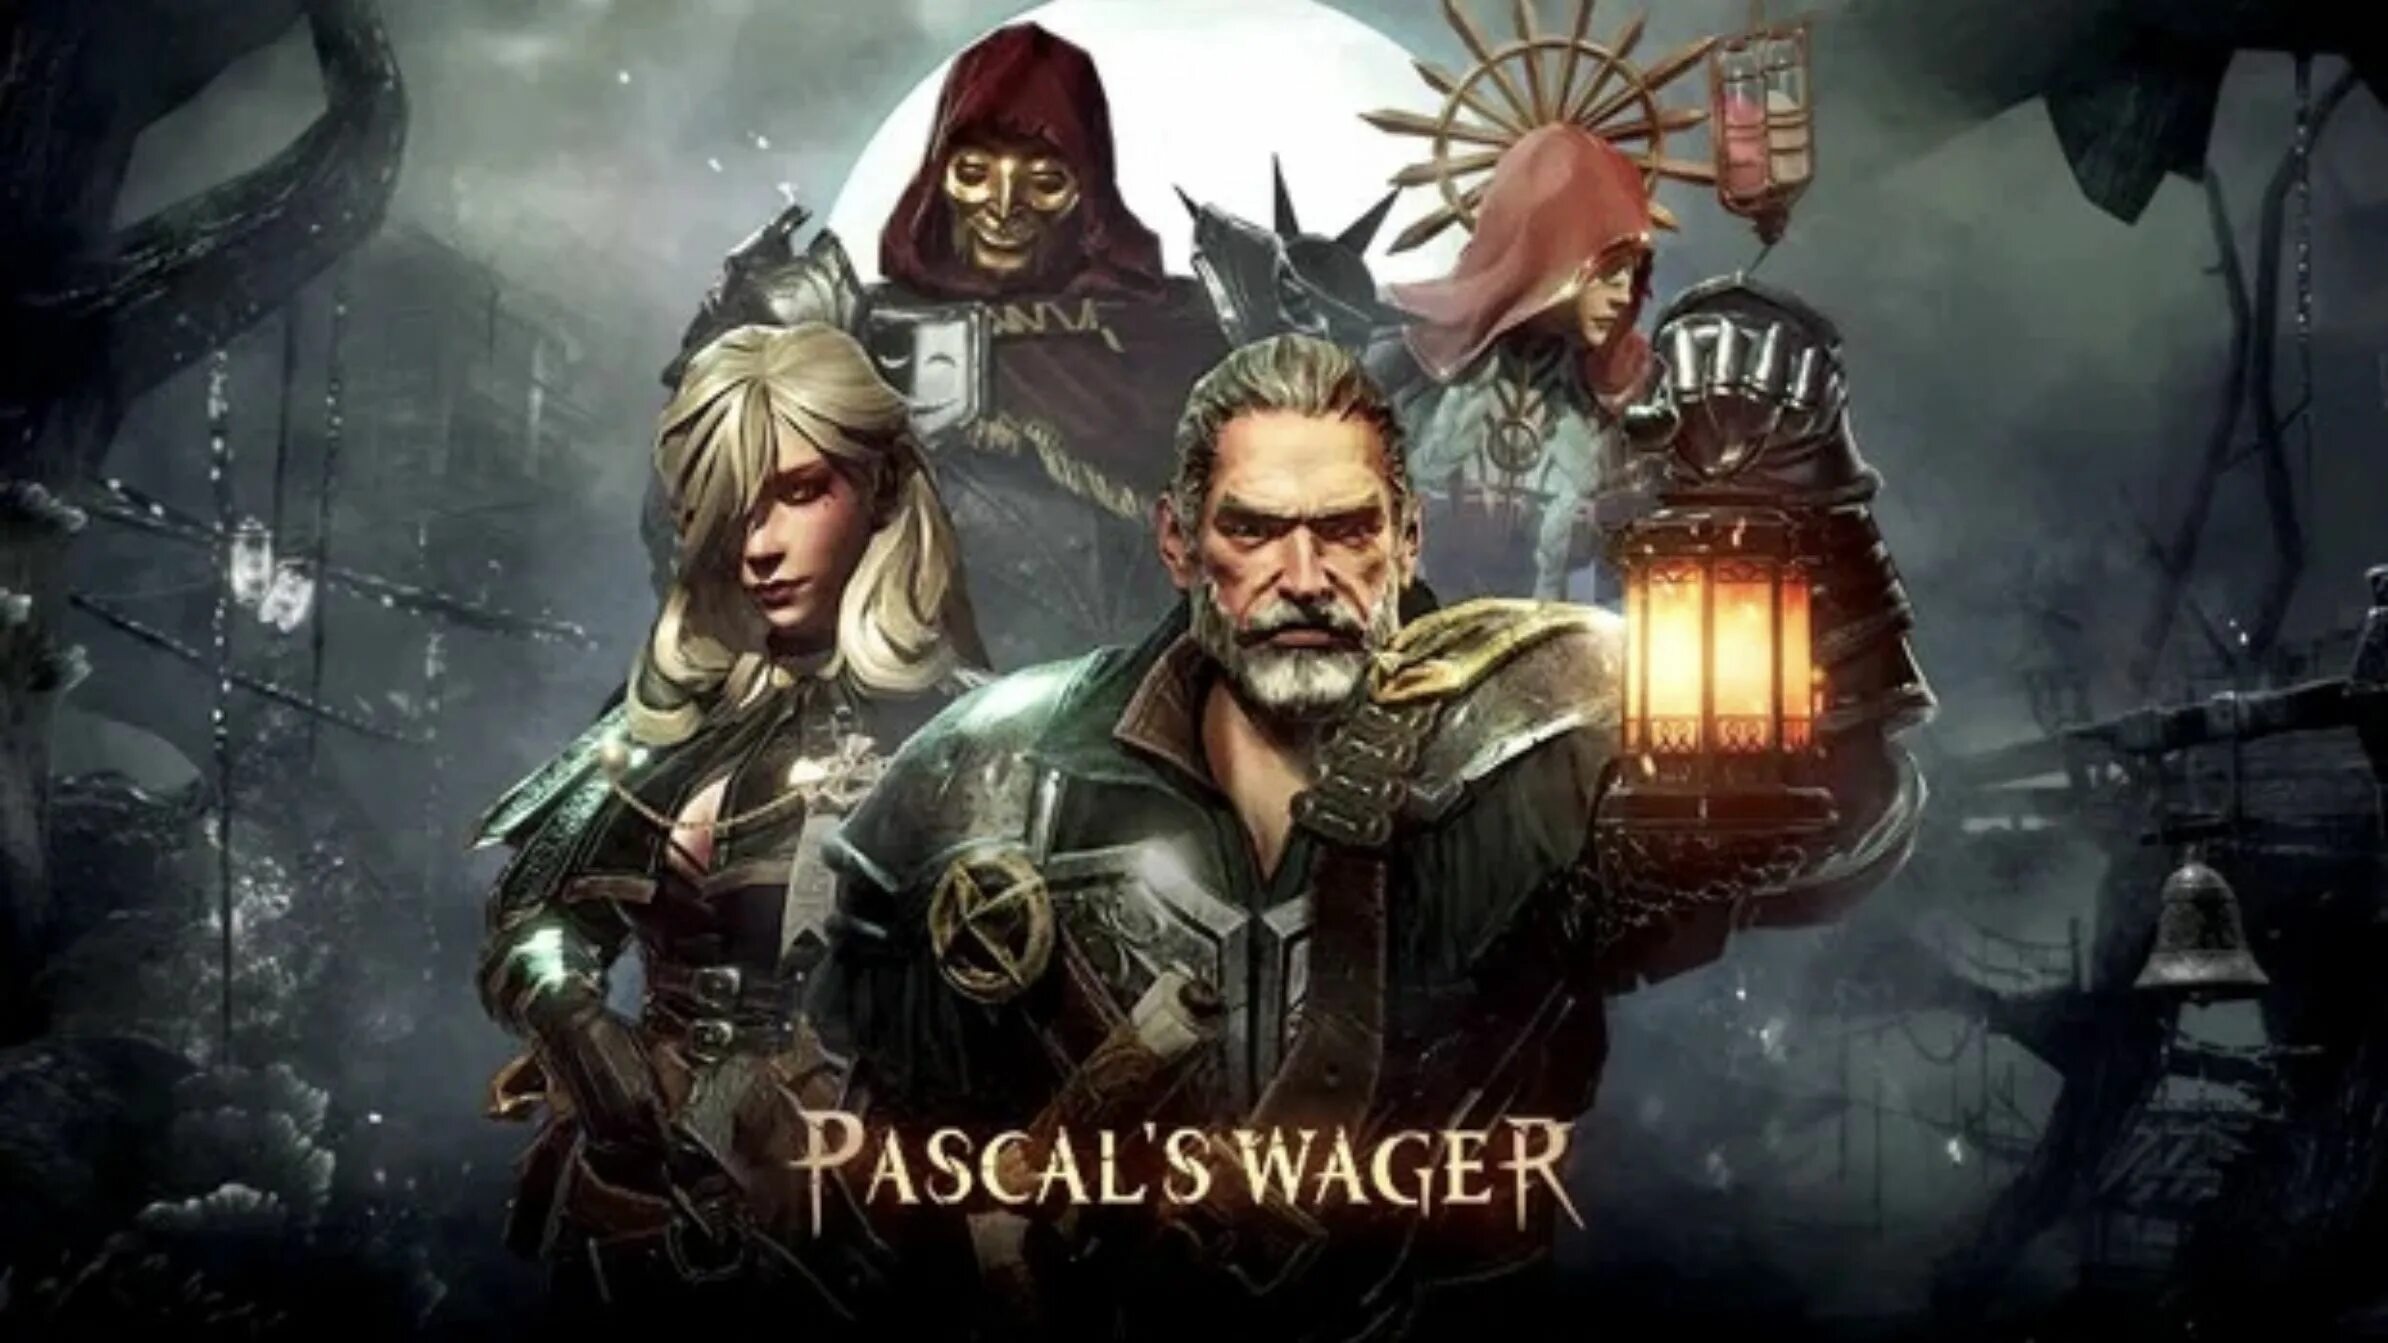 Pascal's Wager: Definitive Edition. Pascal Wager Android. Pascal's Wager на ПК. Pascal's Wager Definitive Edition Нинтендо.